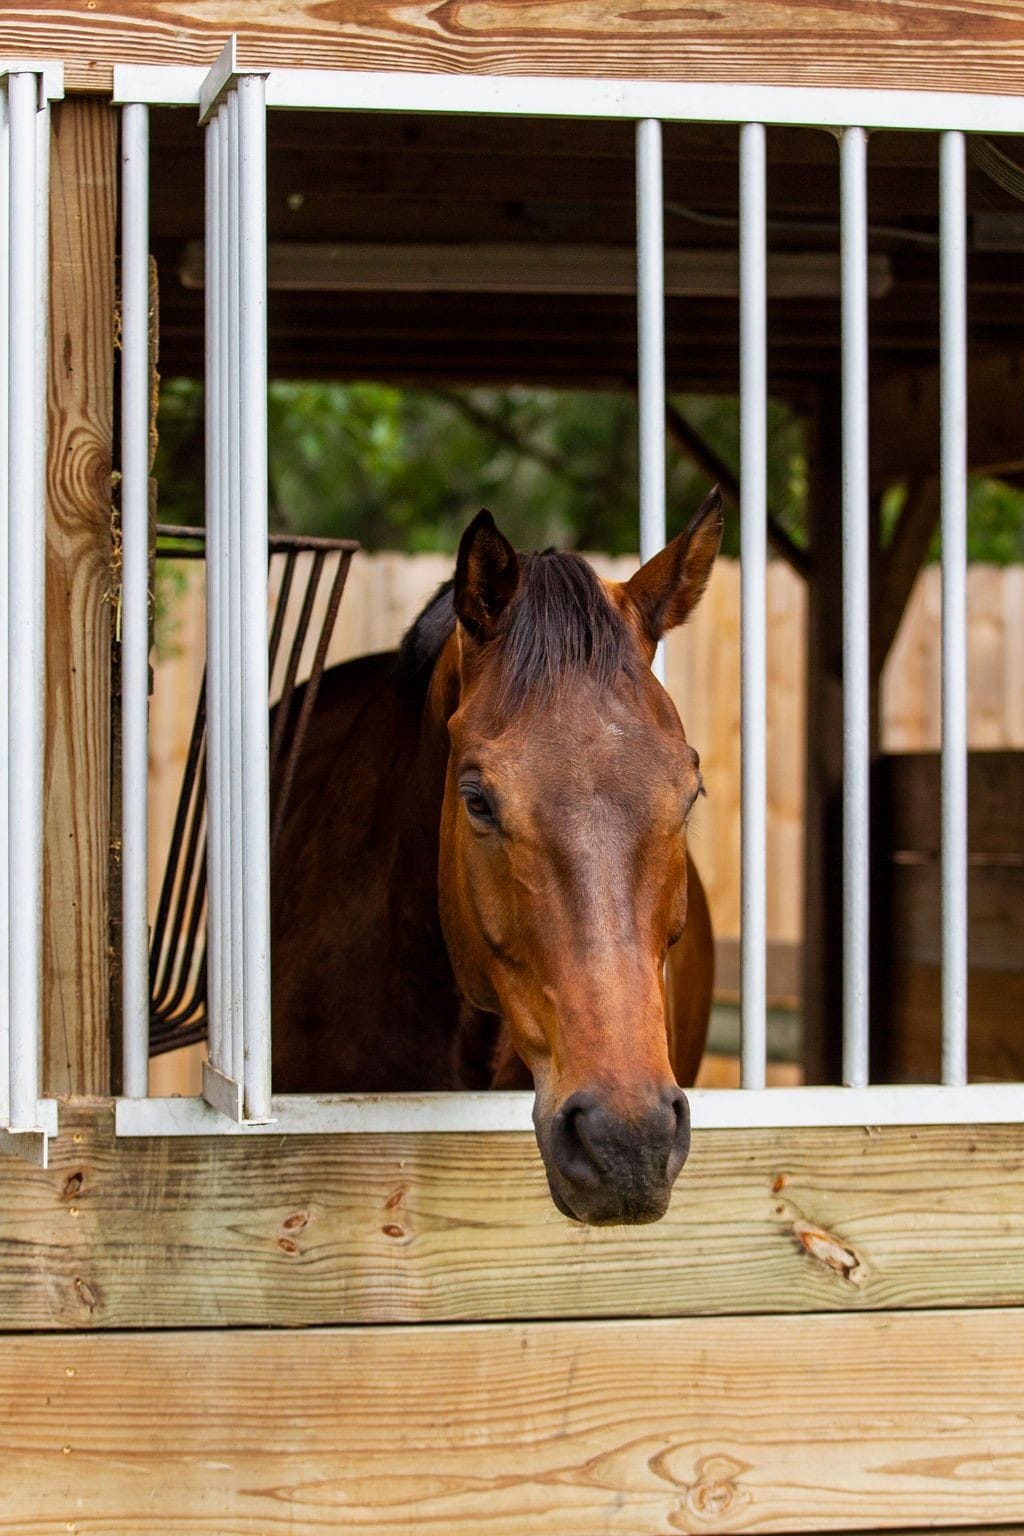 A bay gelding is looking out of an open aluminum stall window at the camera.